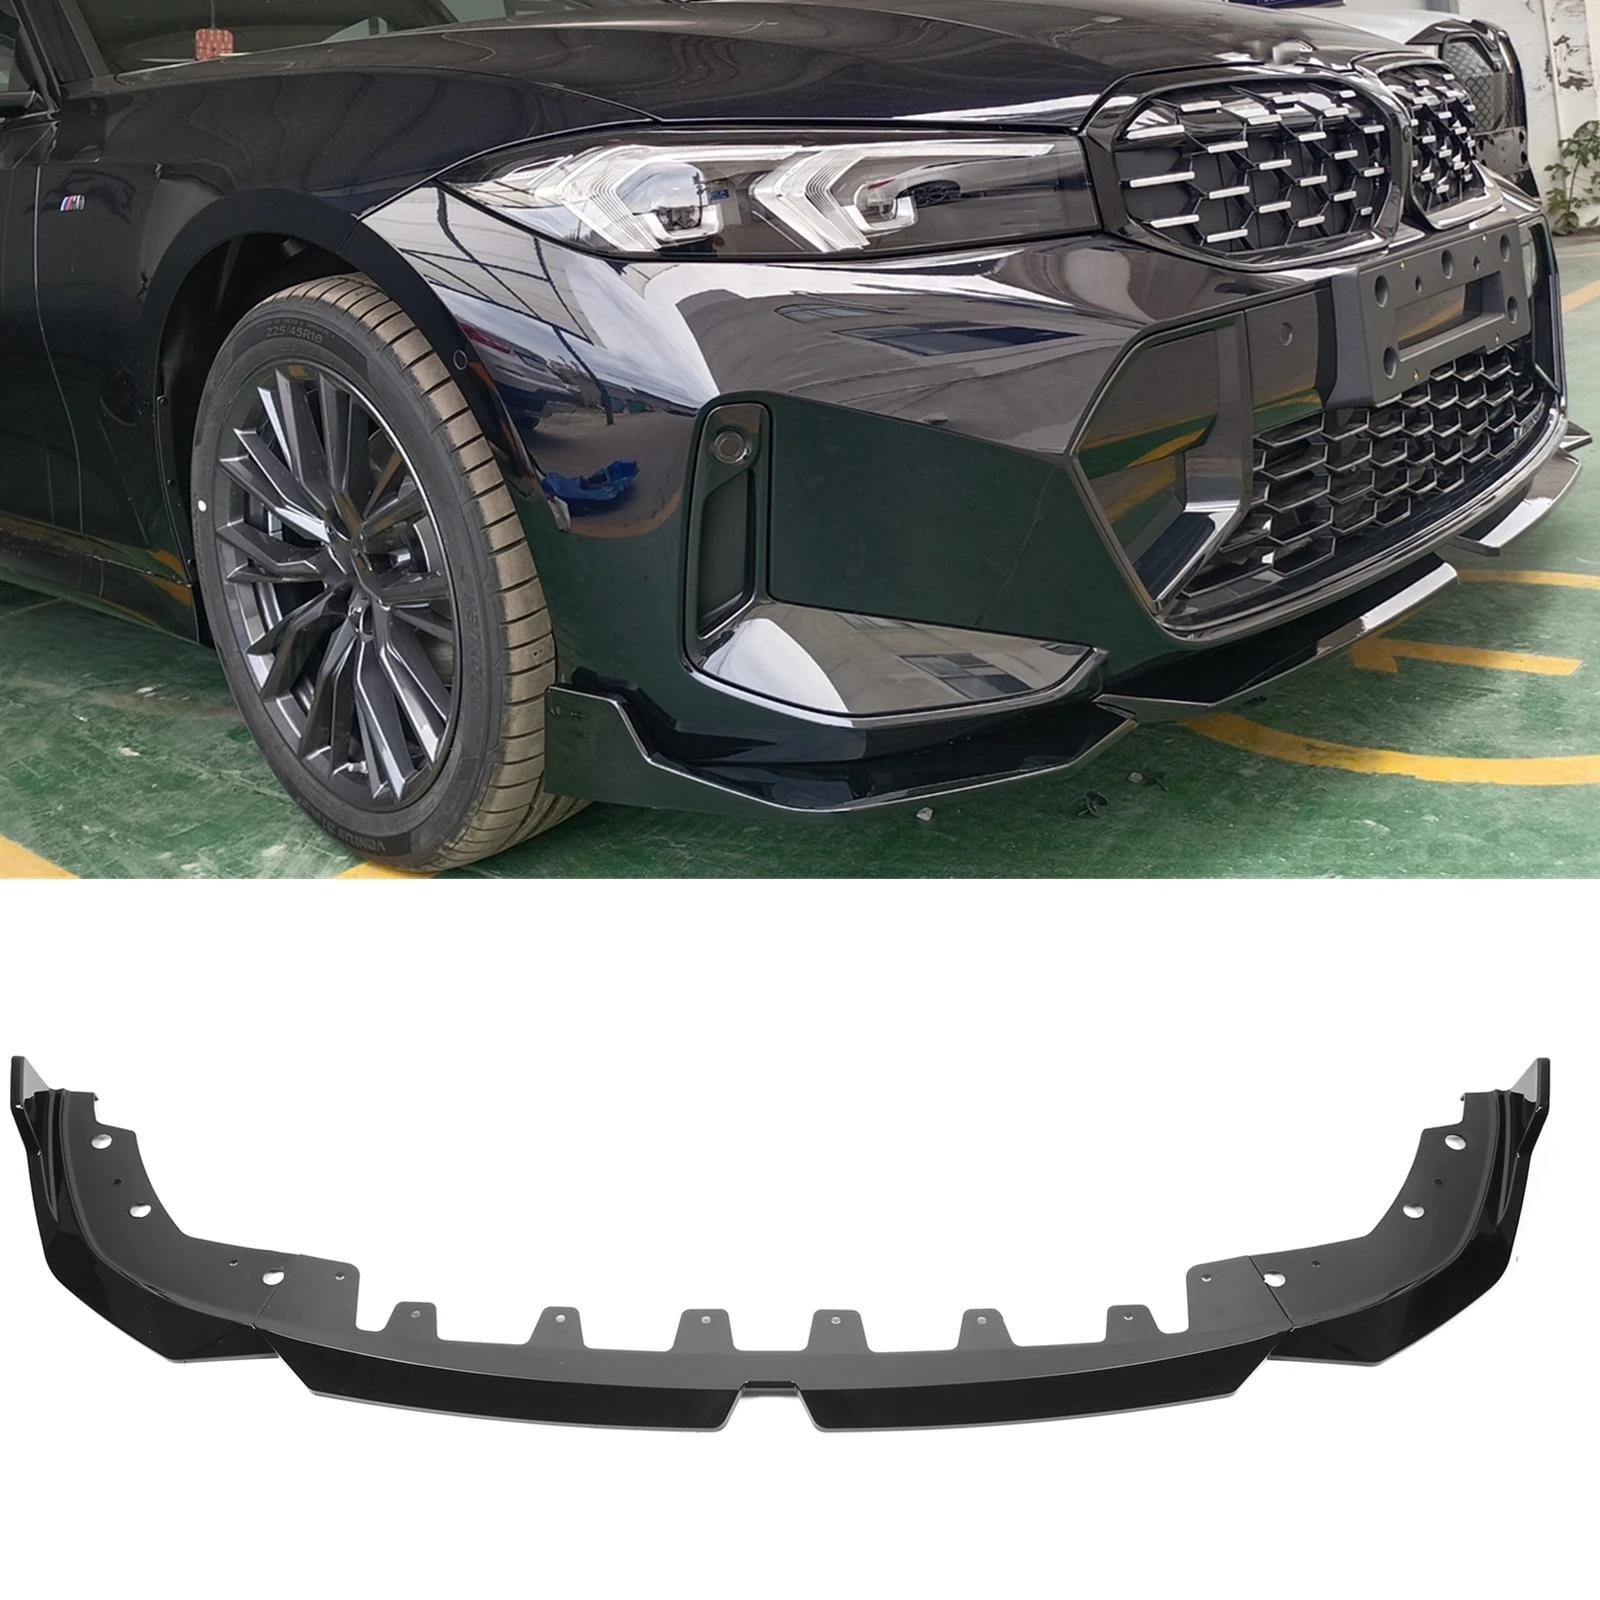 

Front Bumper Spoiler Lip For BMW 3 Series G20 2022.6-2023 330i Glossy Black Car Lower Splitter Blade Lippe Protector Guard Plate